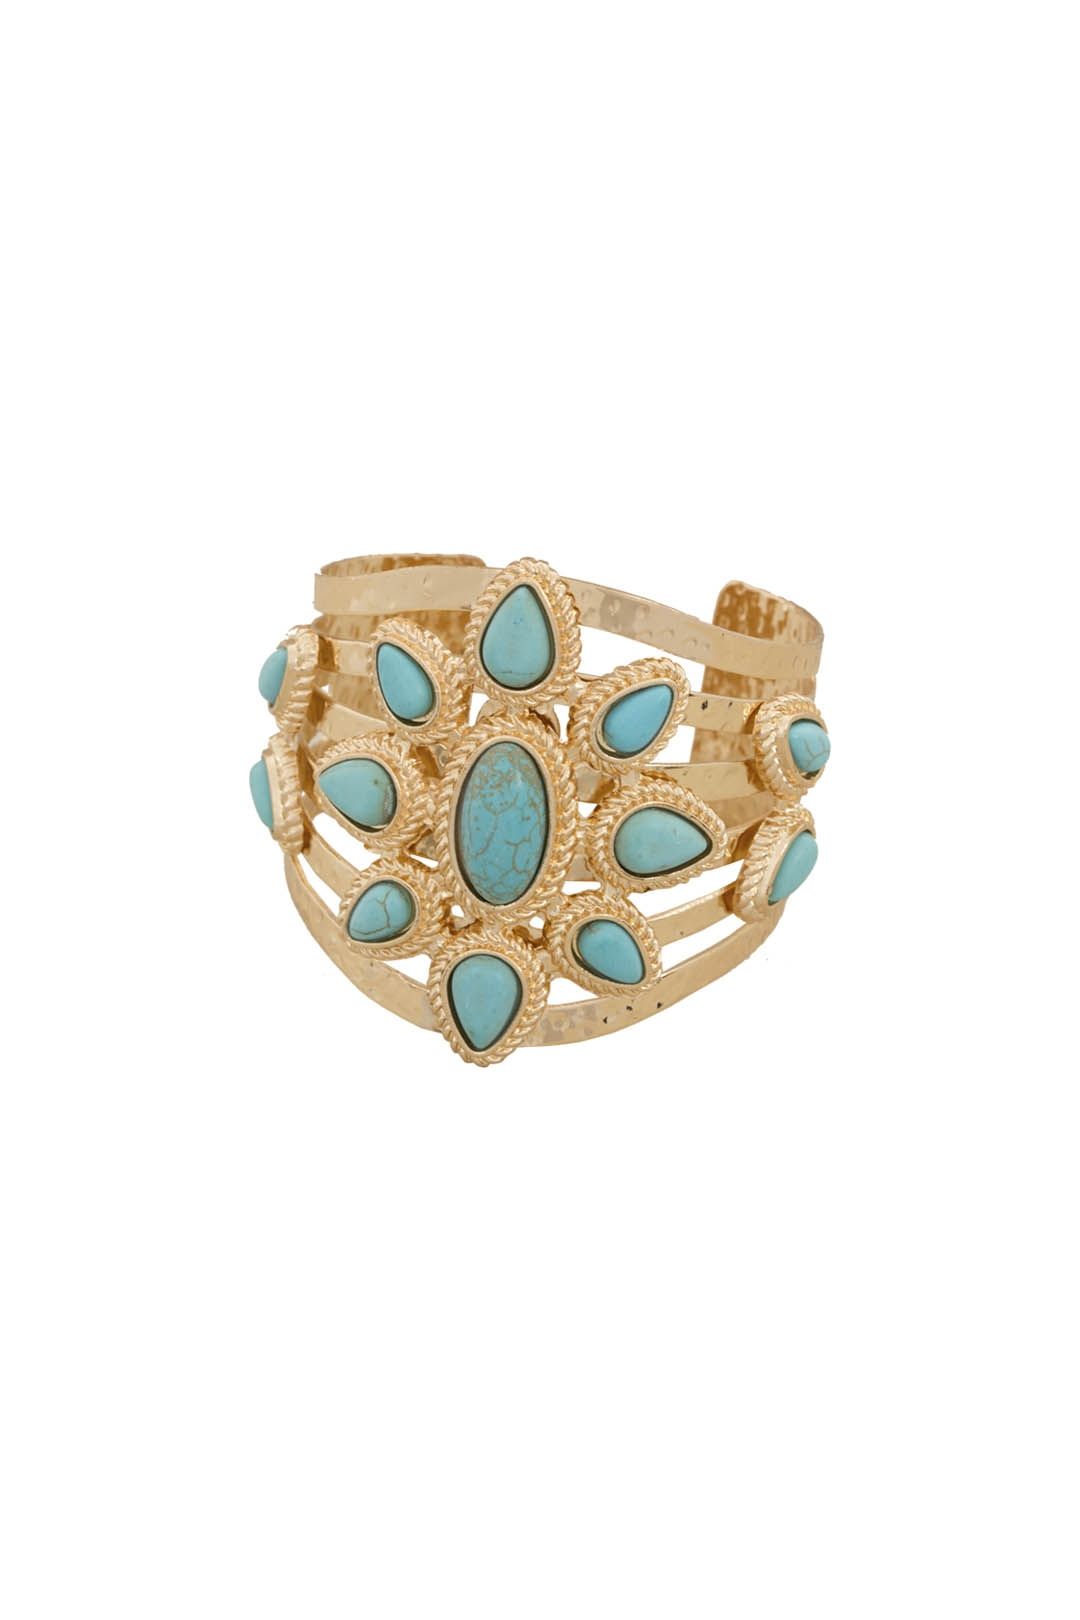 Adorne - Stone Teardrop Flower Cut-Out Metal Cuff - Blue and Gold - Front